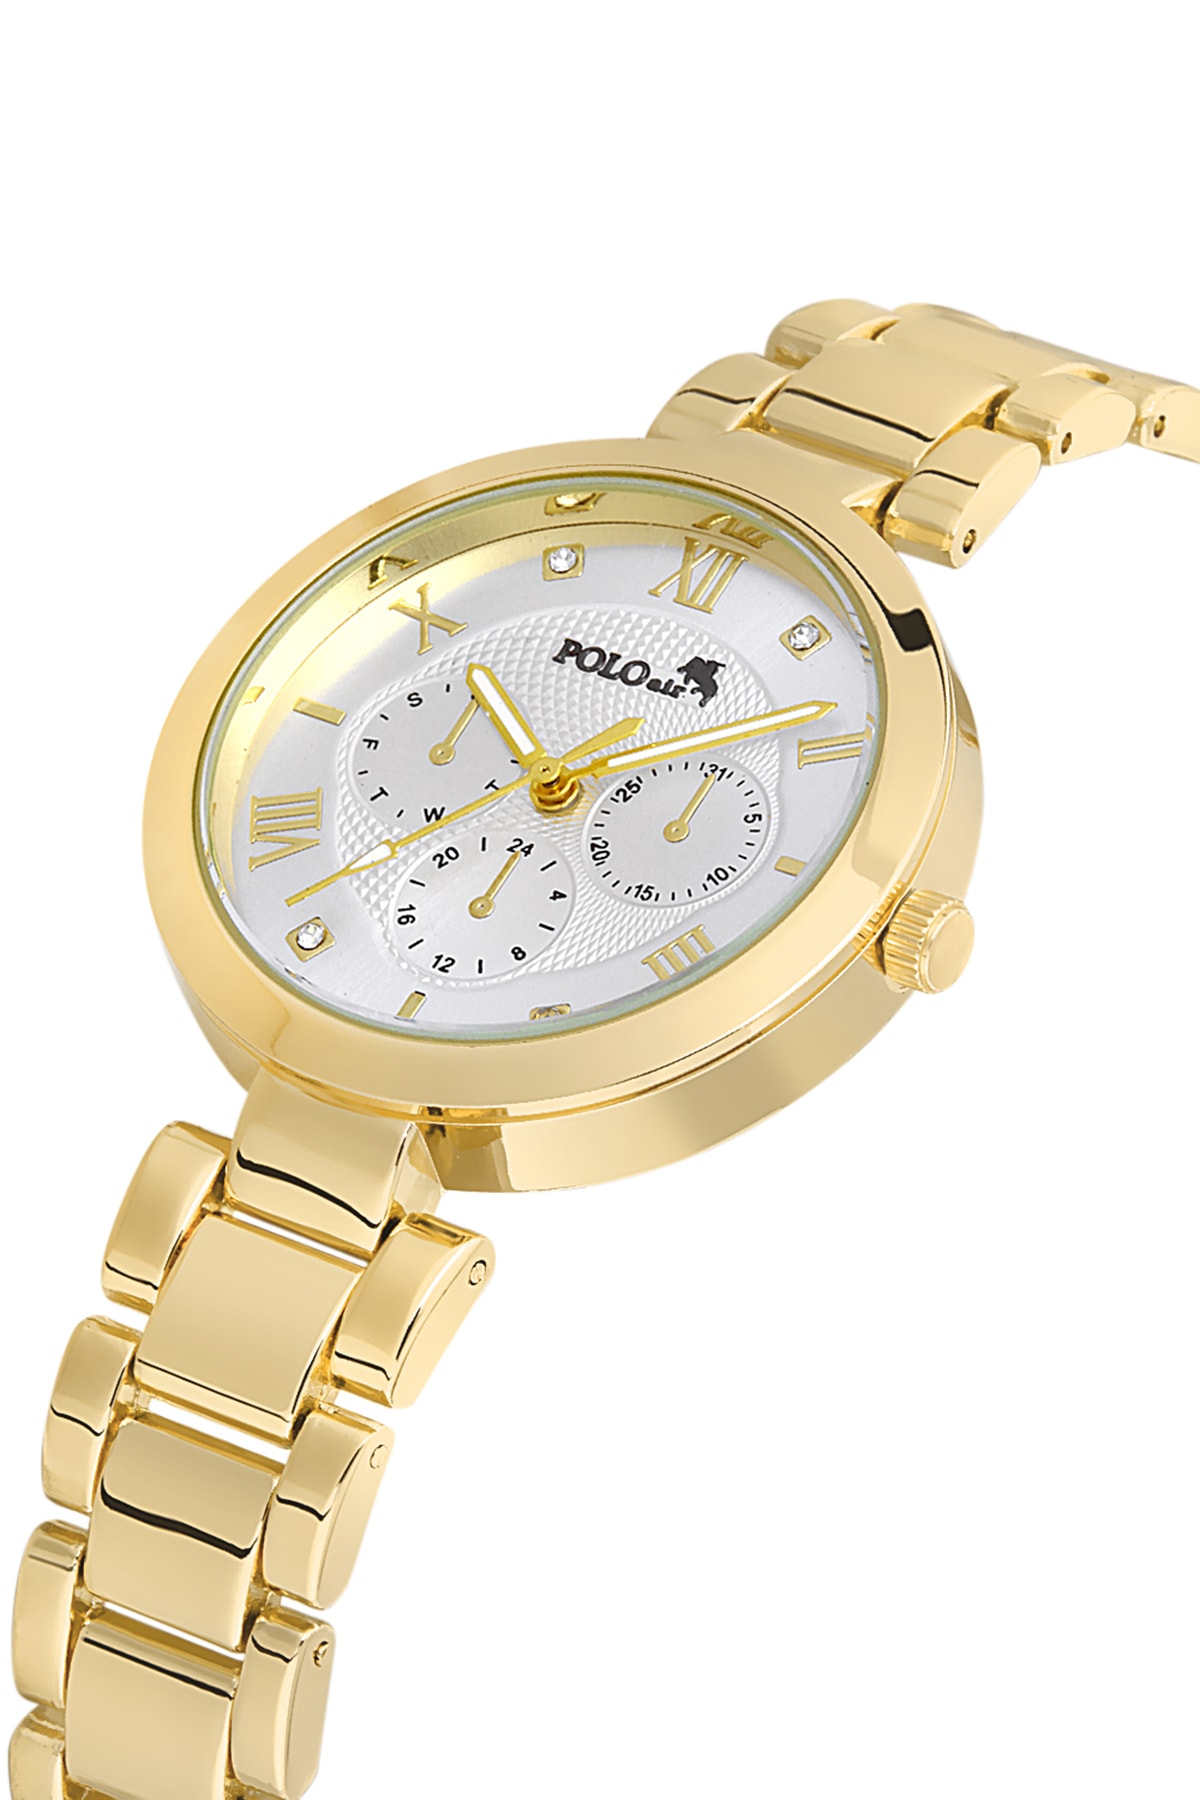 Polo Air Roman Numeral Women's Wristwatch Yellow Color